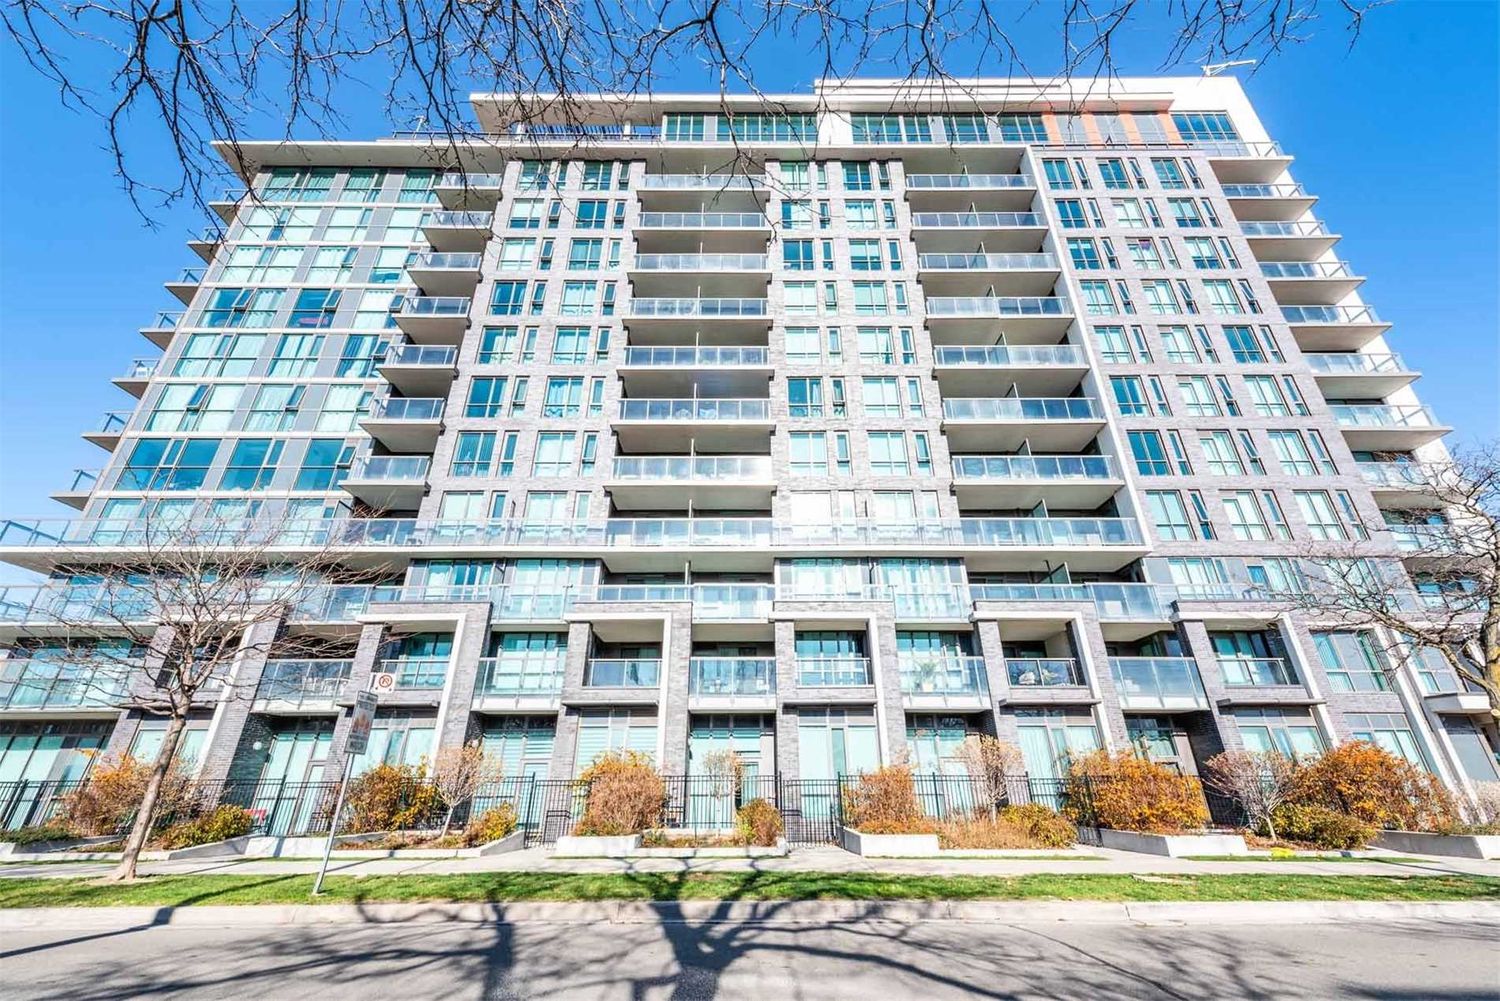 80 Esther Lorrie Drive. Cloud 9 Condos is located in  Etobicoke, Toronto - image #2 of 3